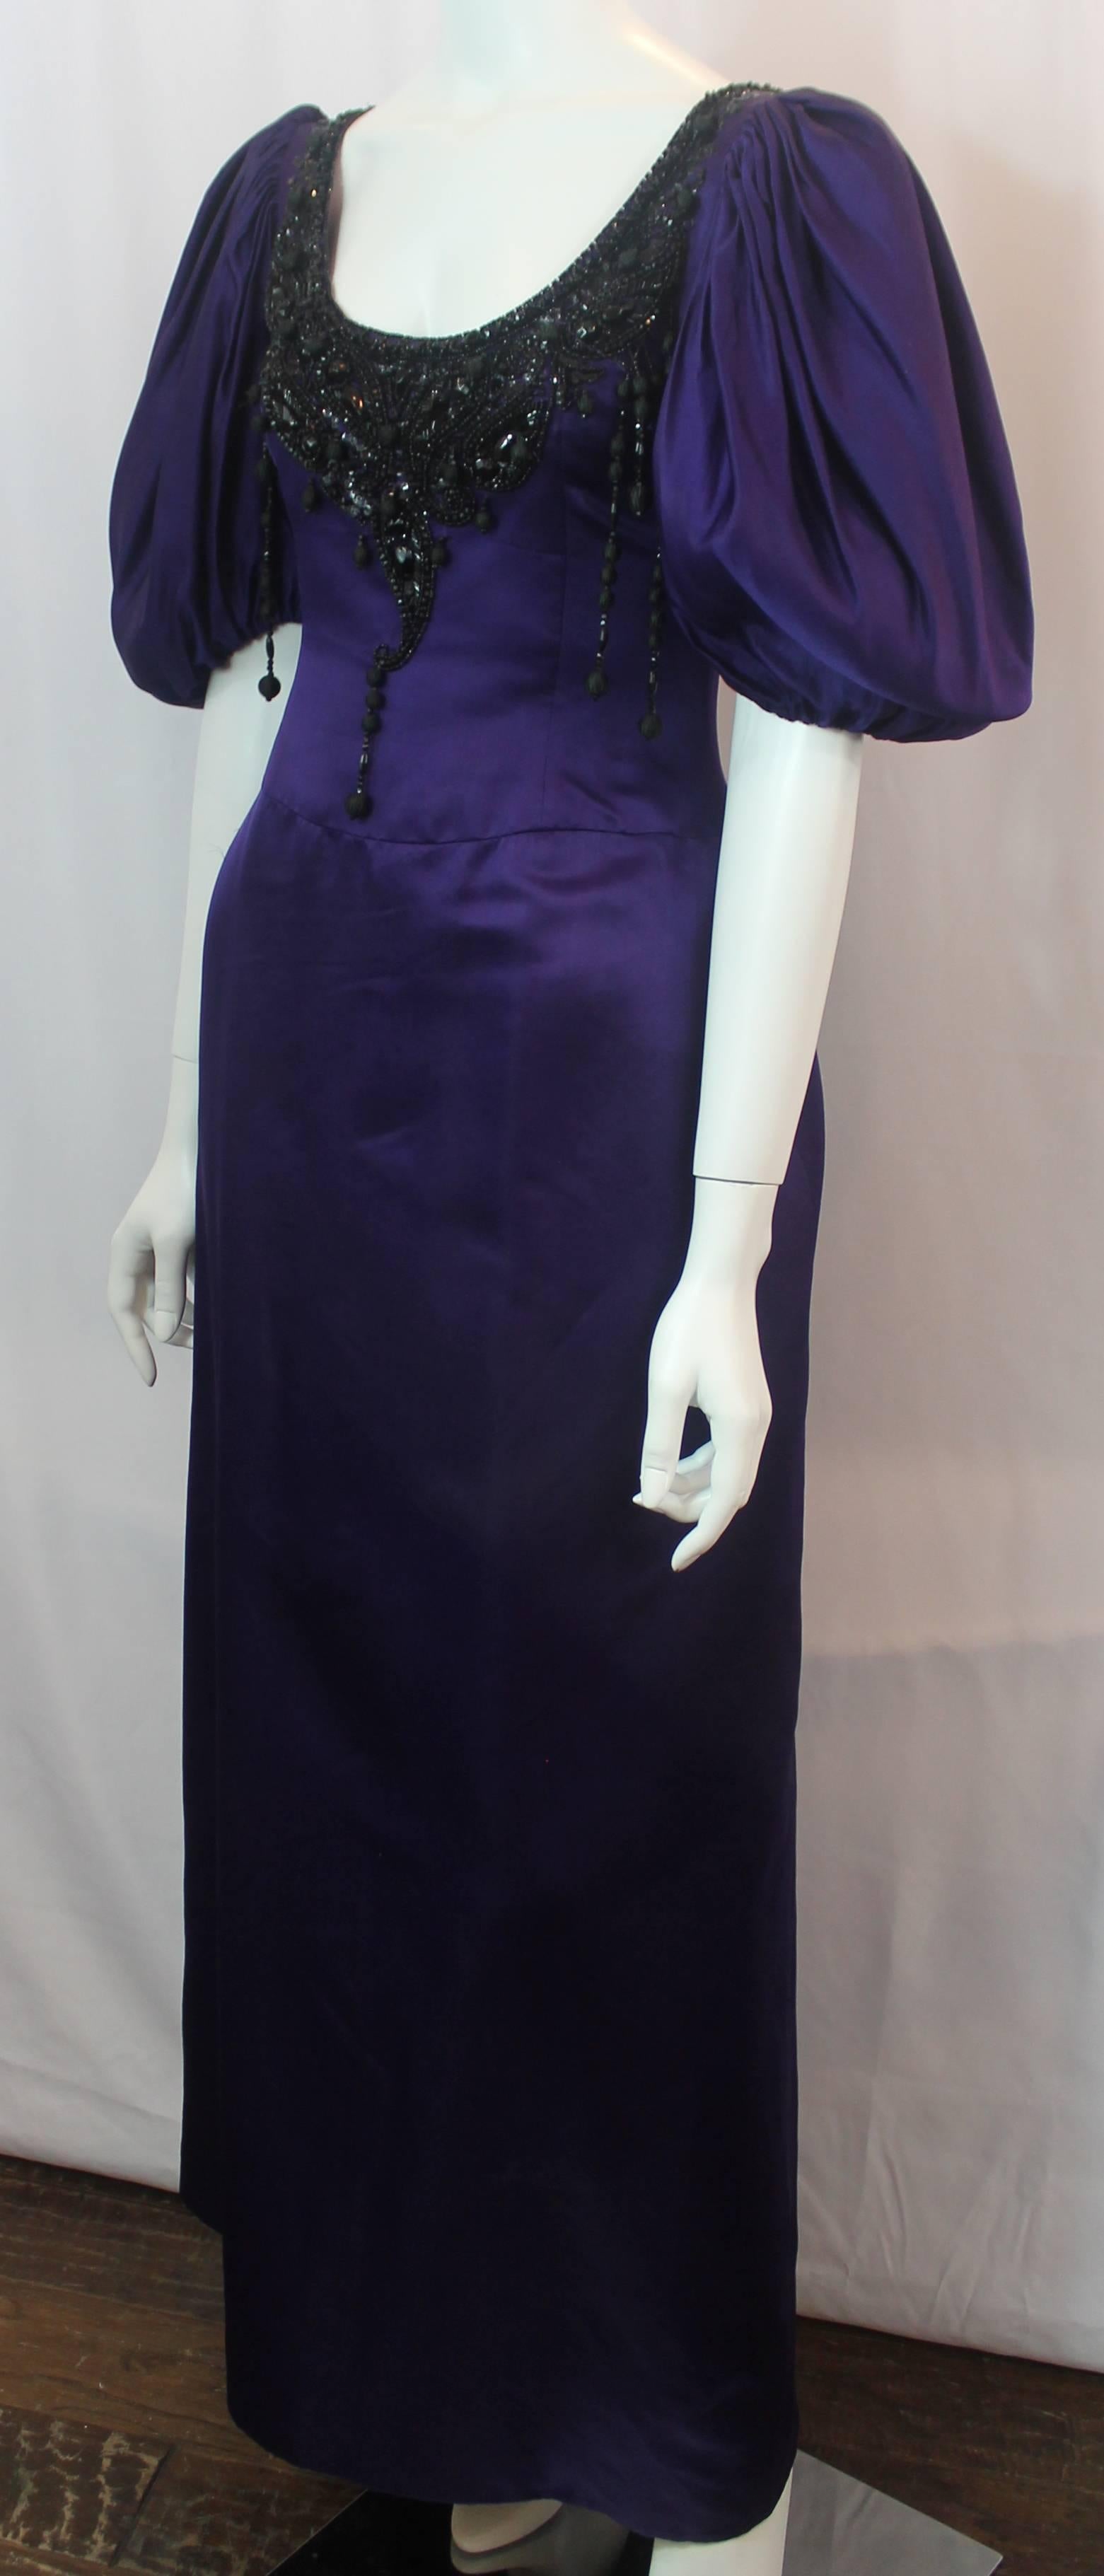 Oscar de la Renta Purple Silk Gown with Puffy Sleeves and Beading - 8 -circa 90s. This ball gown has a swoop neckline and puffy sleeves. It is purple silk decorated with black beading and hanging beads. There is a back zipper.